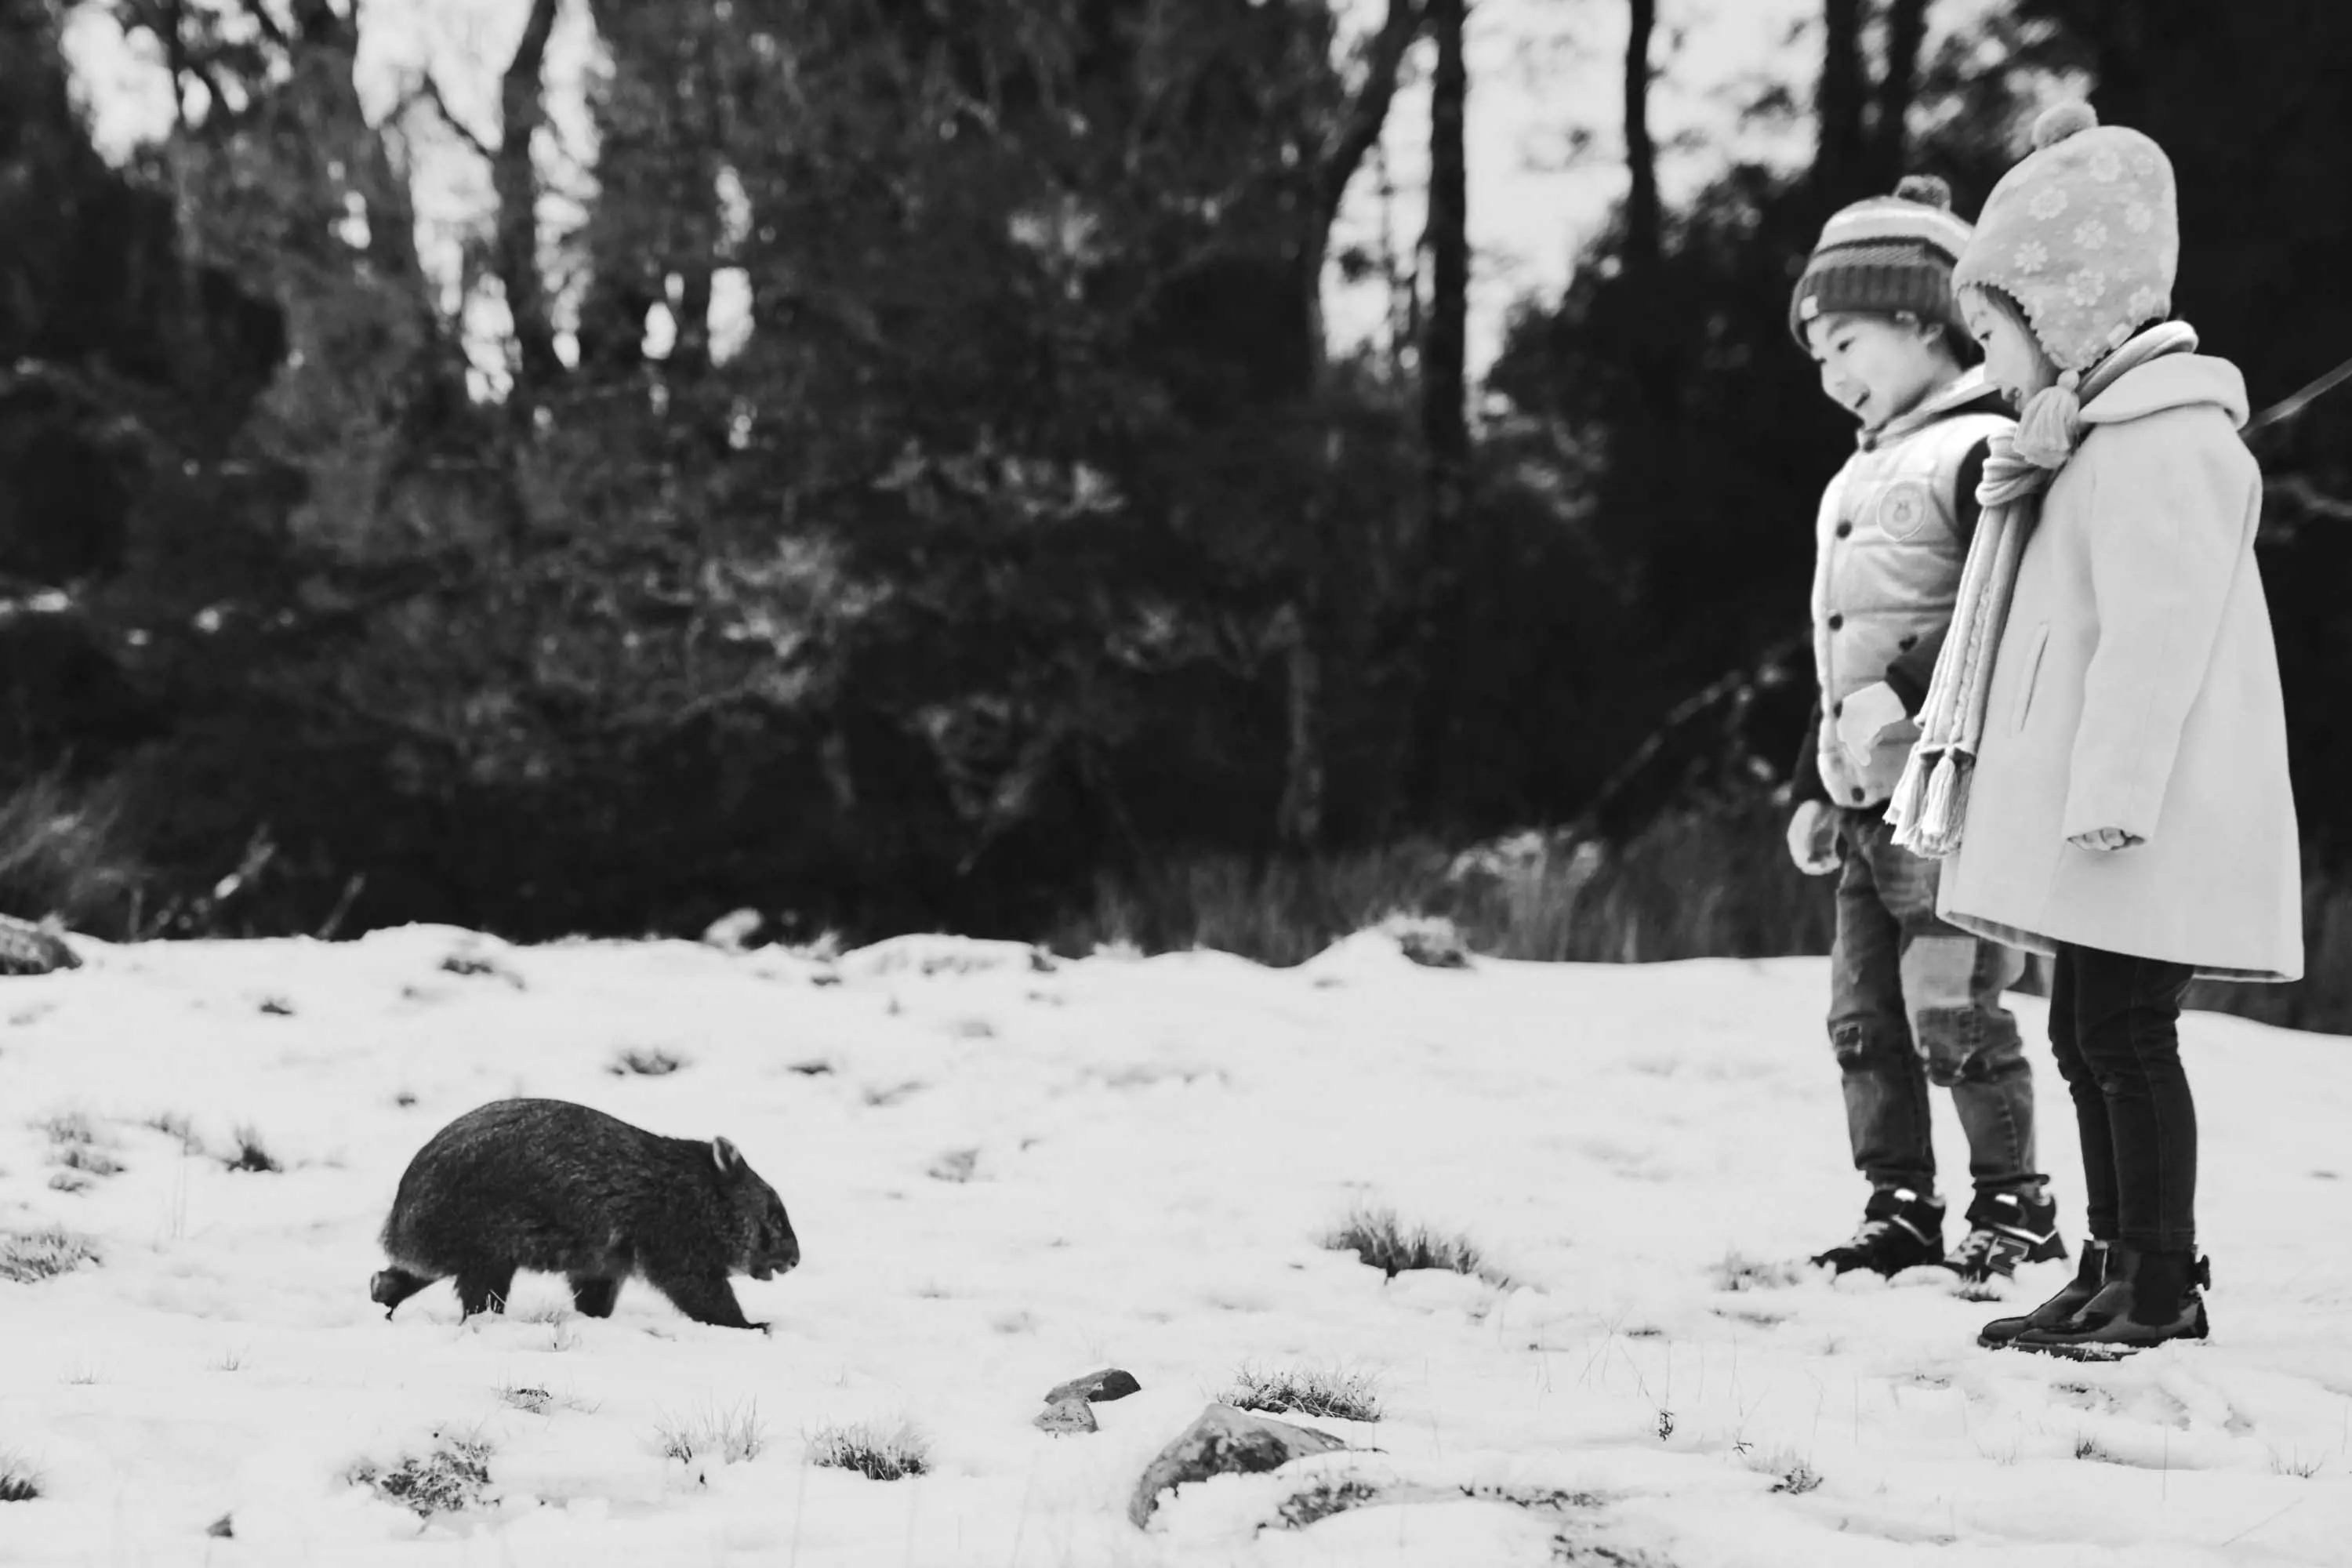 Two small children wearing heavy winter jackets stand in snow and look at a small wombat trotting towards them.